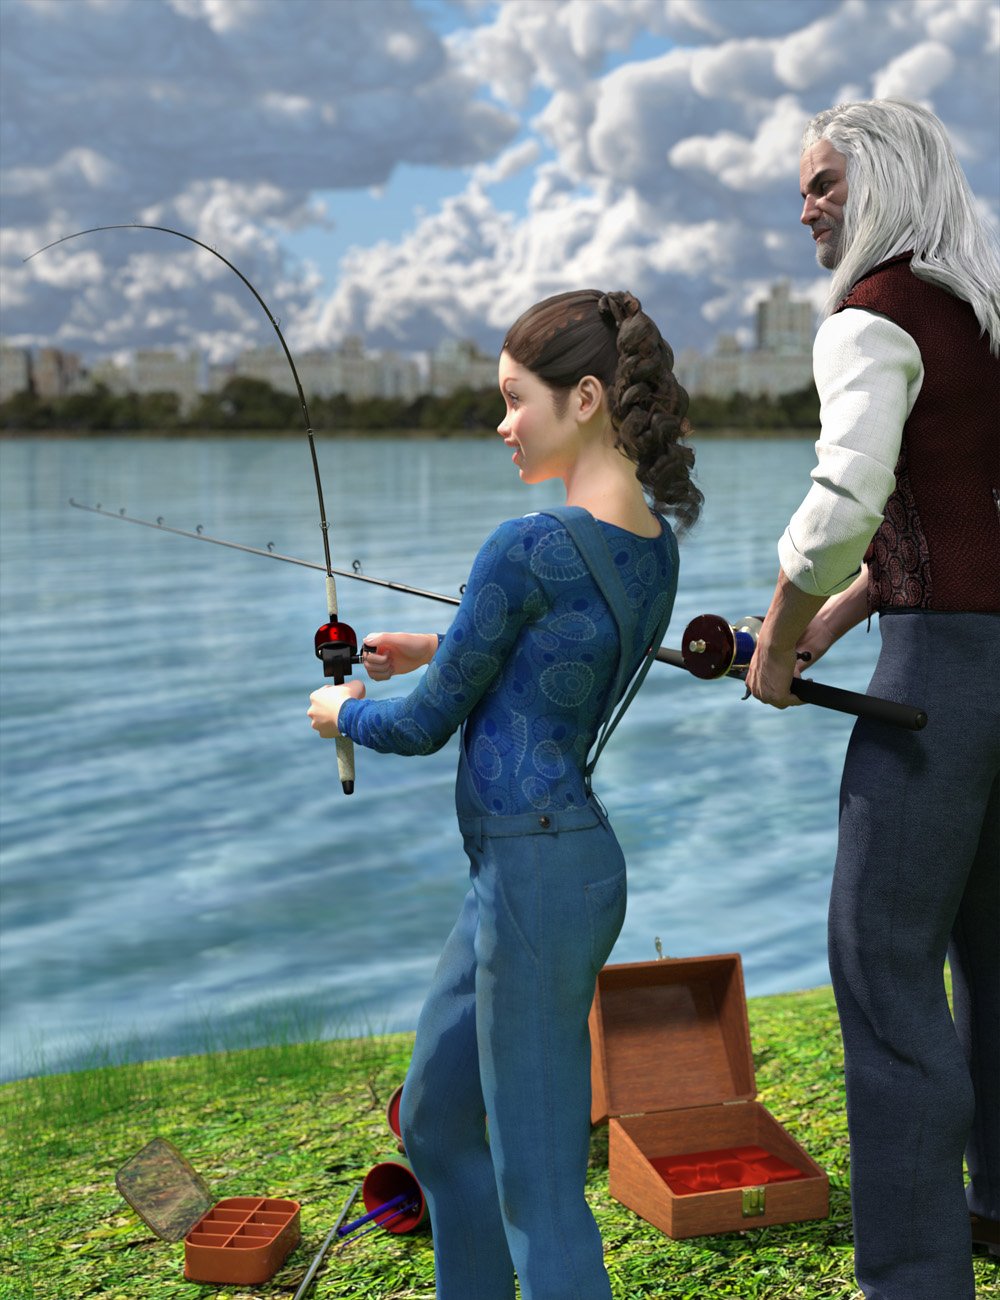 Gone Fishing II - Newbie and Pro by: Code 66, 3D Models by Daz 3D